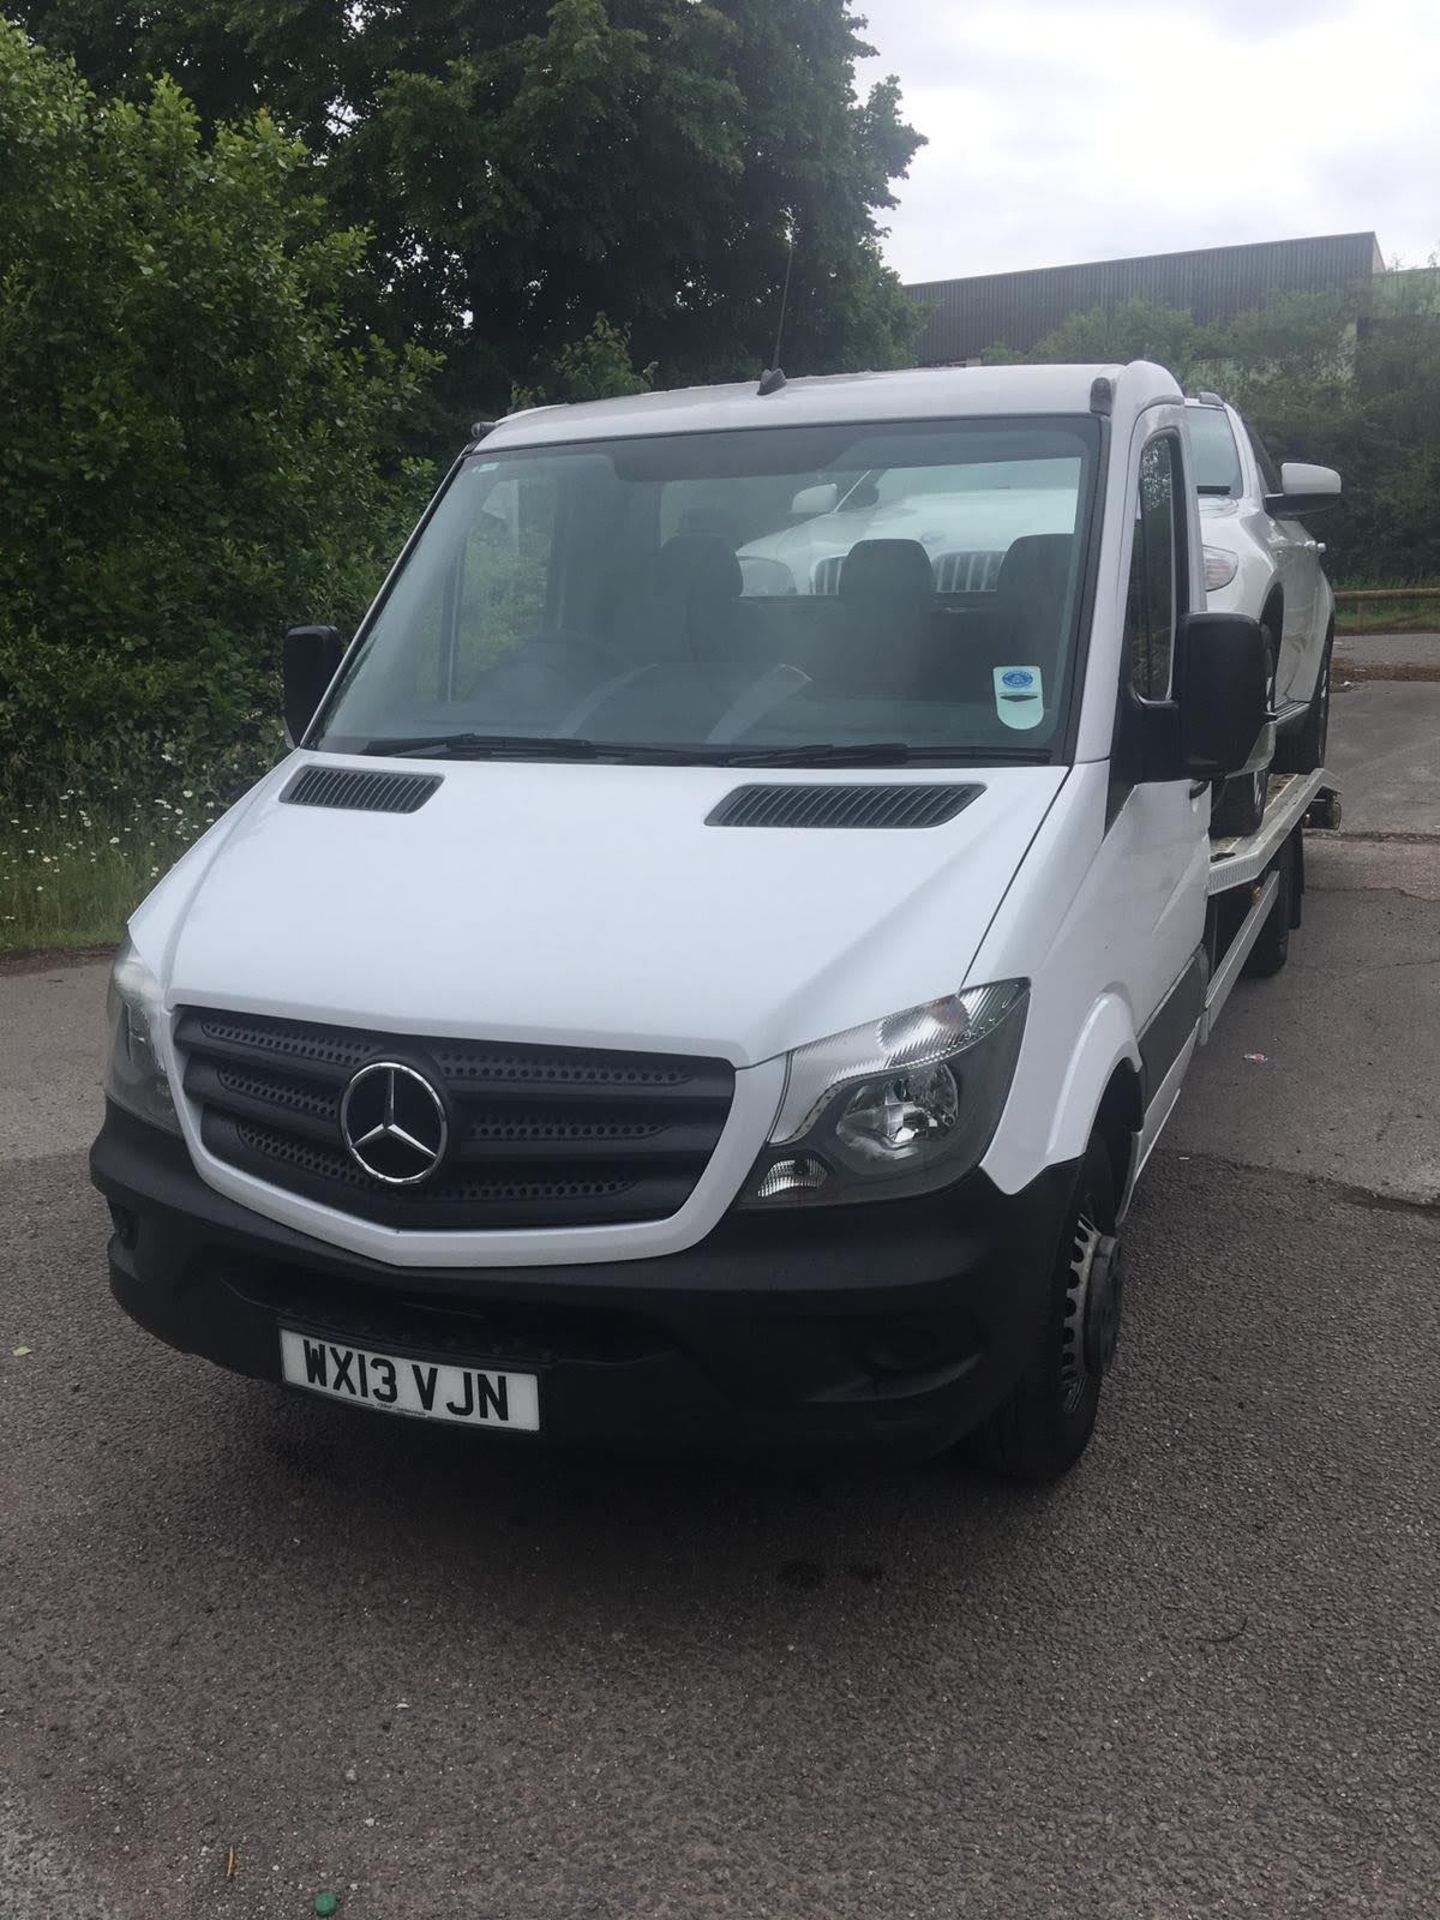 VERY RARE! 2013/13 REG MERCEDES-BENZ SPRINTER 519 CDI 3.0 DIESEL WHITE RECOVERY, (BMW NOT INCLUDED) - Image 4 of 25